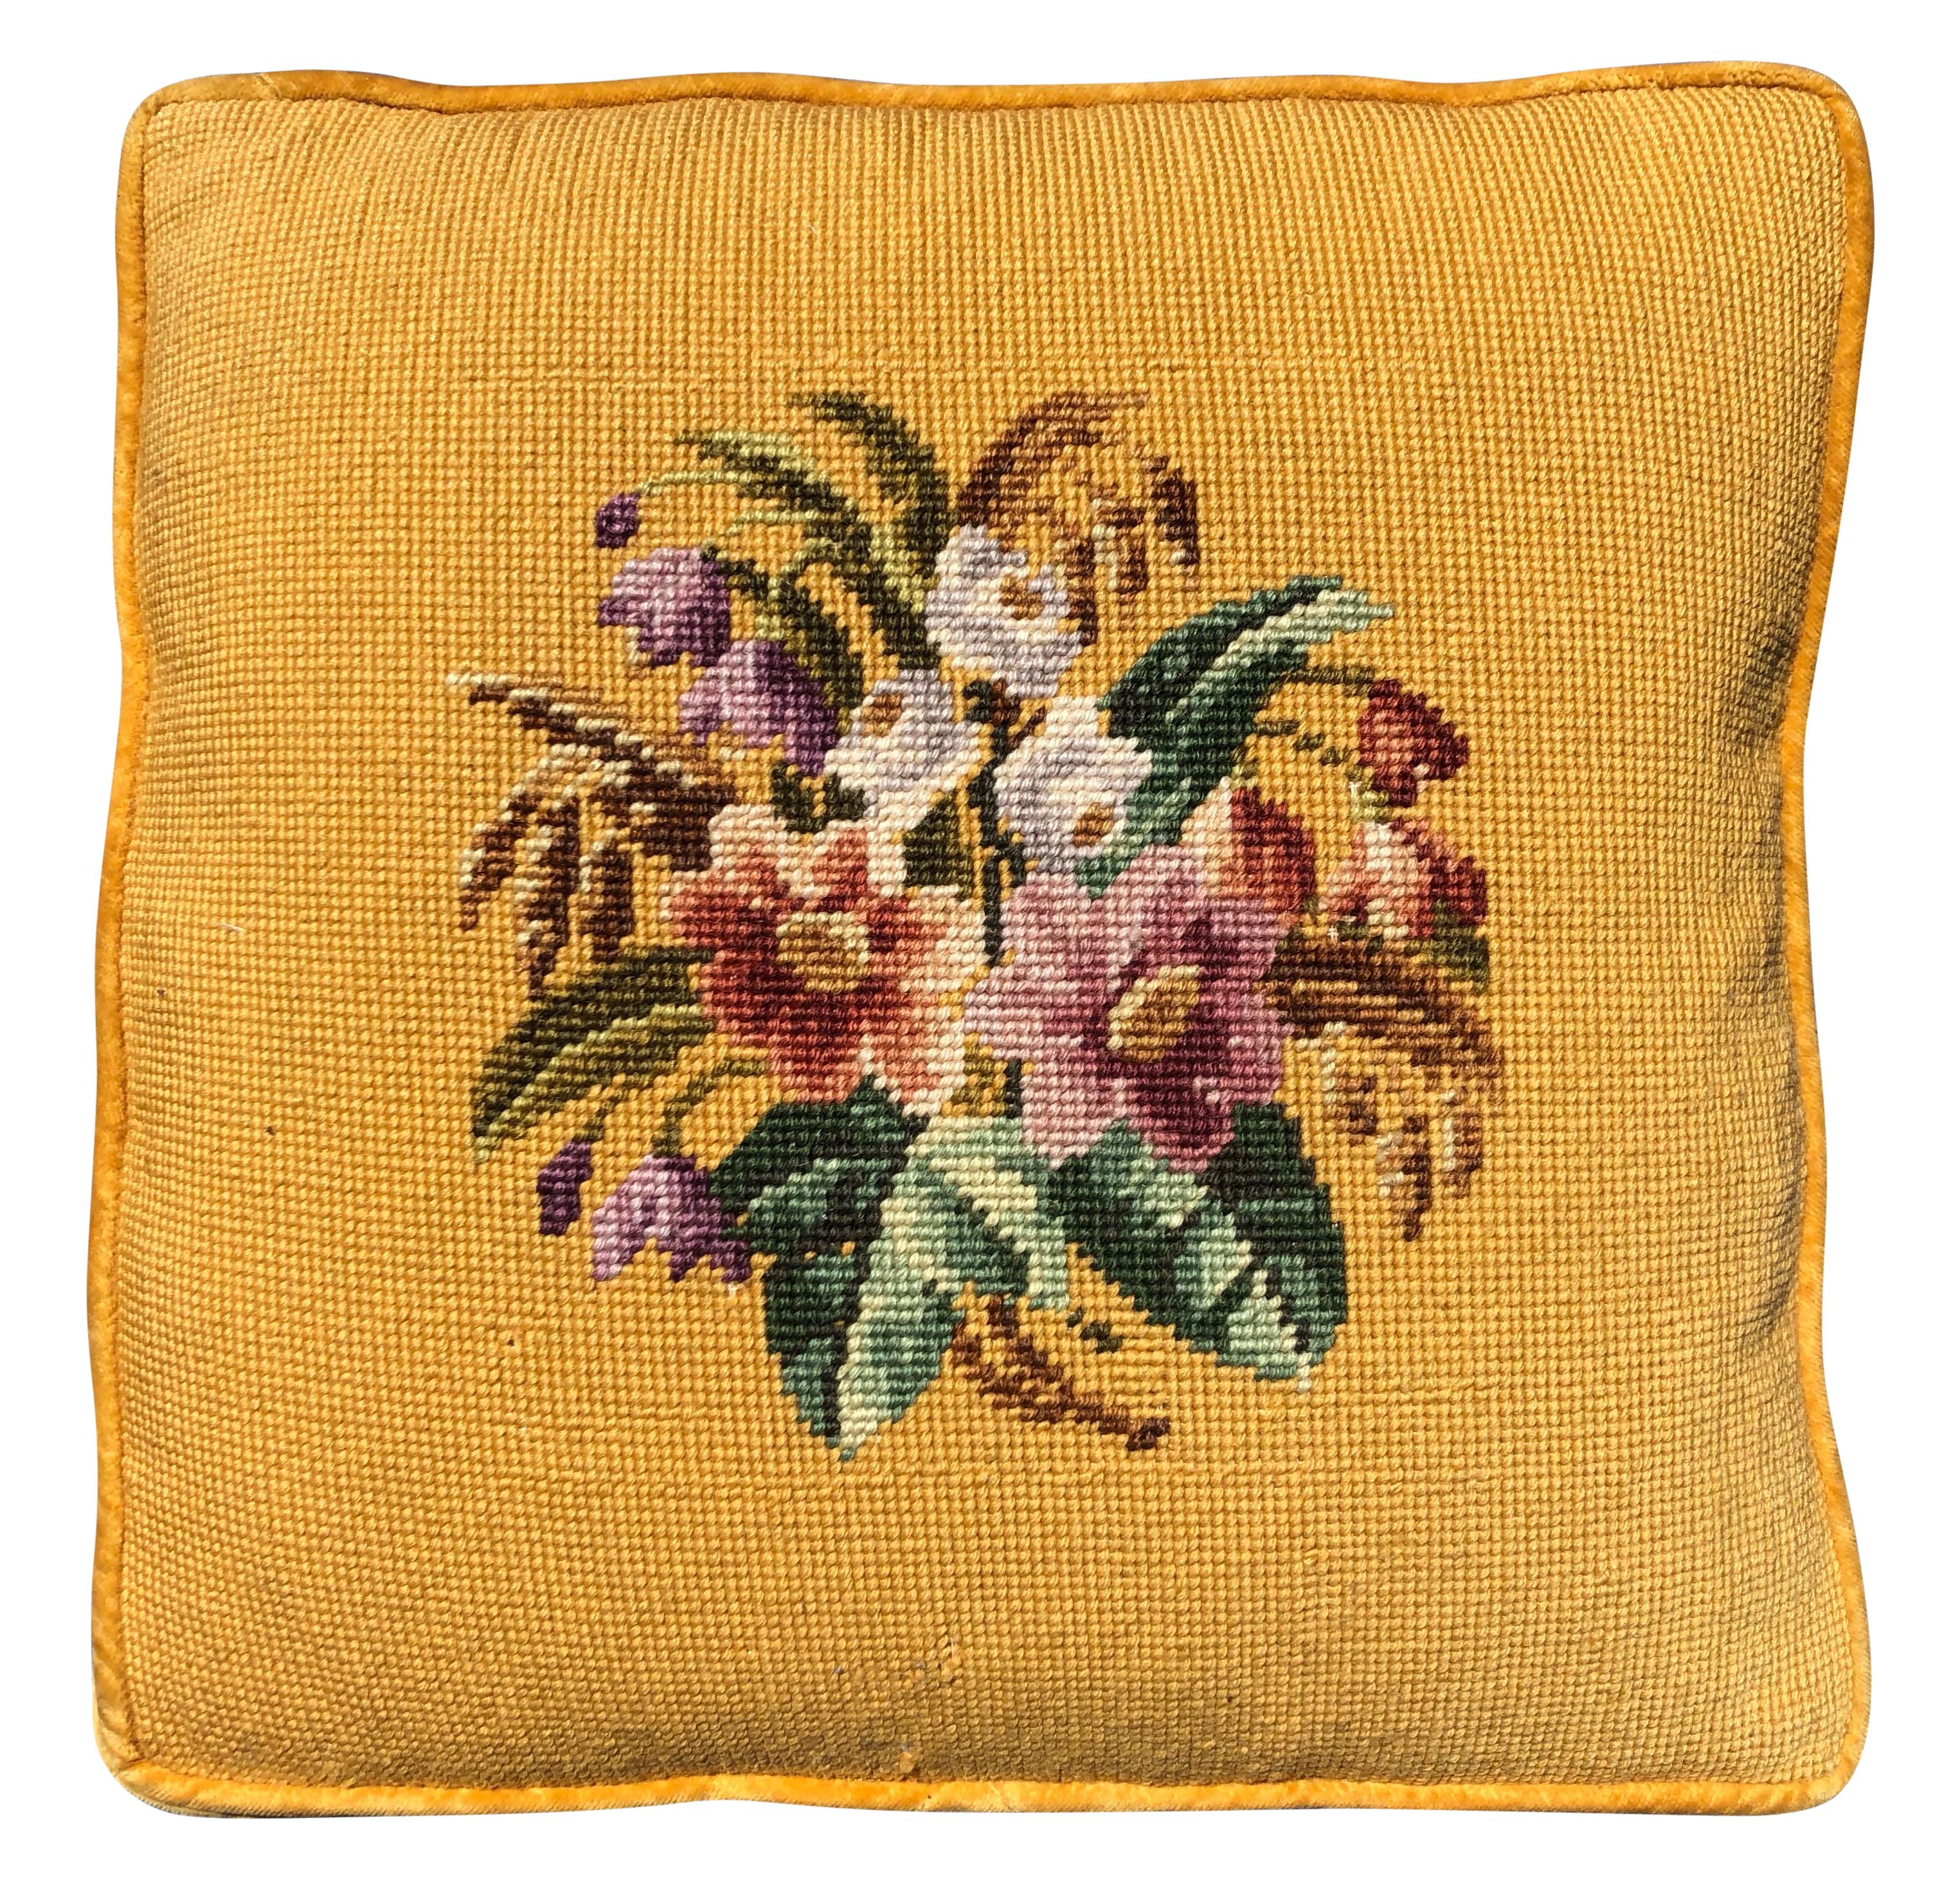 These are a pair of charming yellow needlepoint embroidered pillows. The back is covered in the same gold colored velvet while the front has yellow/gold piping. Each pillow has its own floral motif, but have the same yellow background and look great